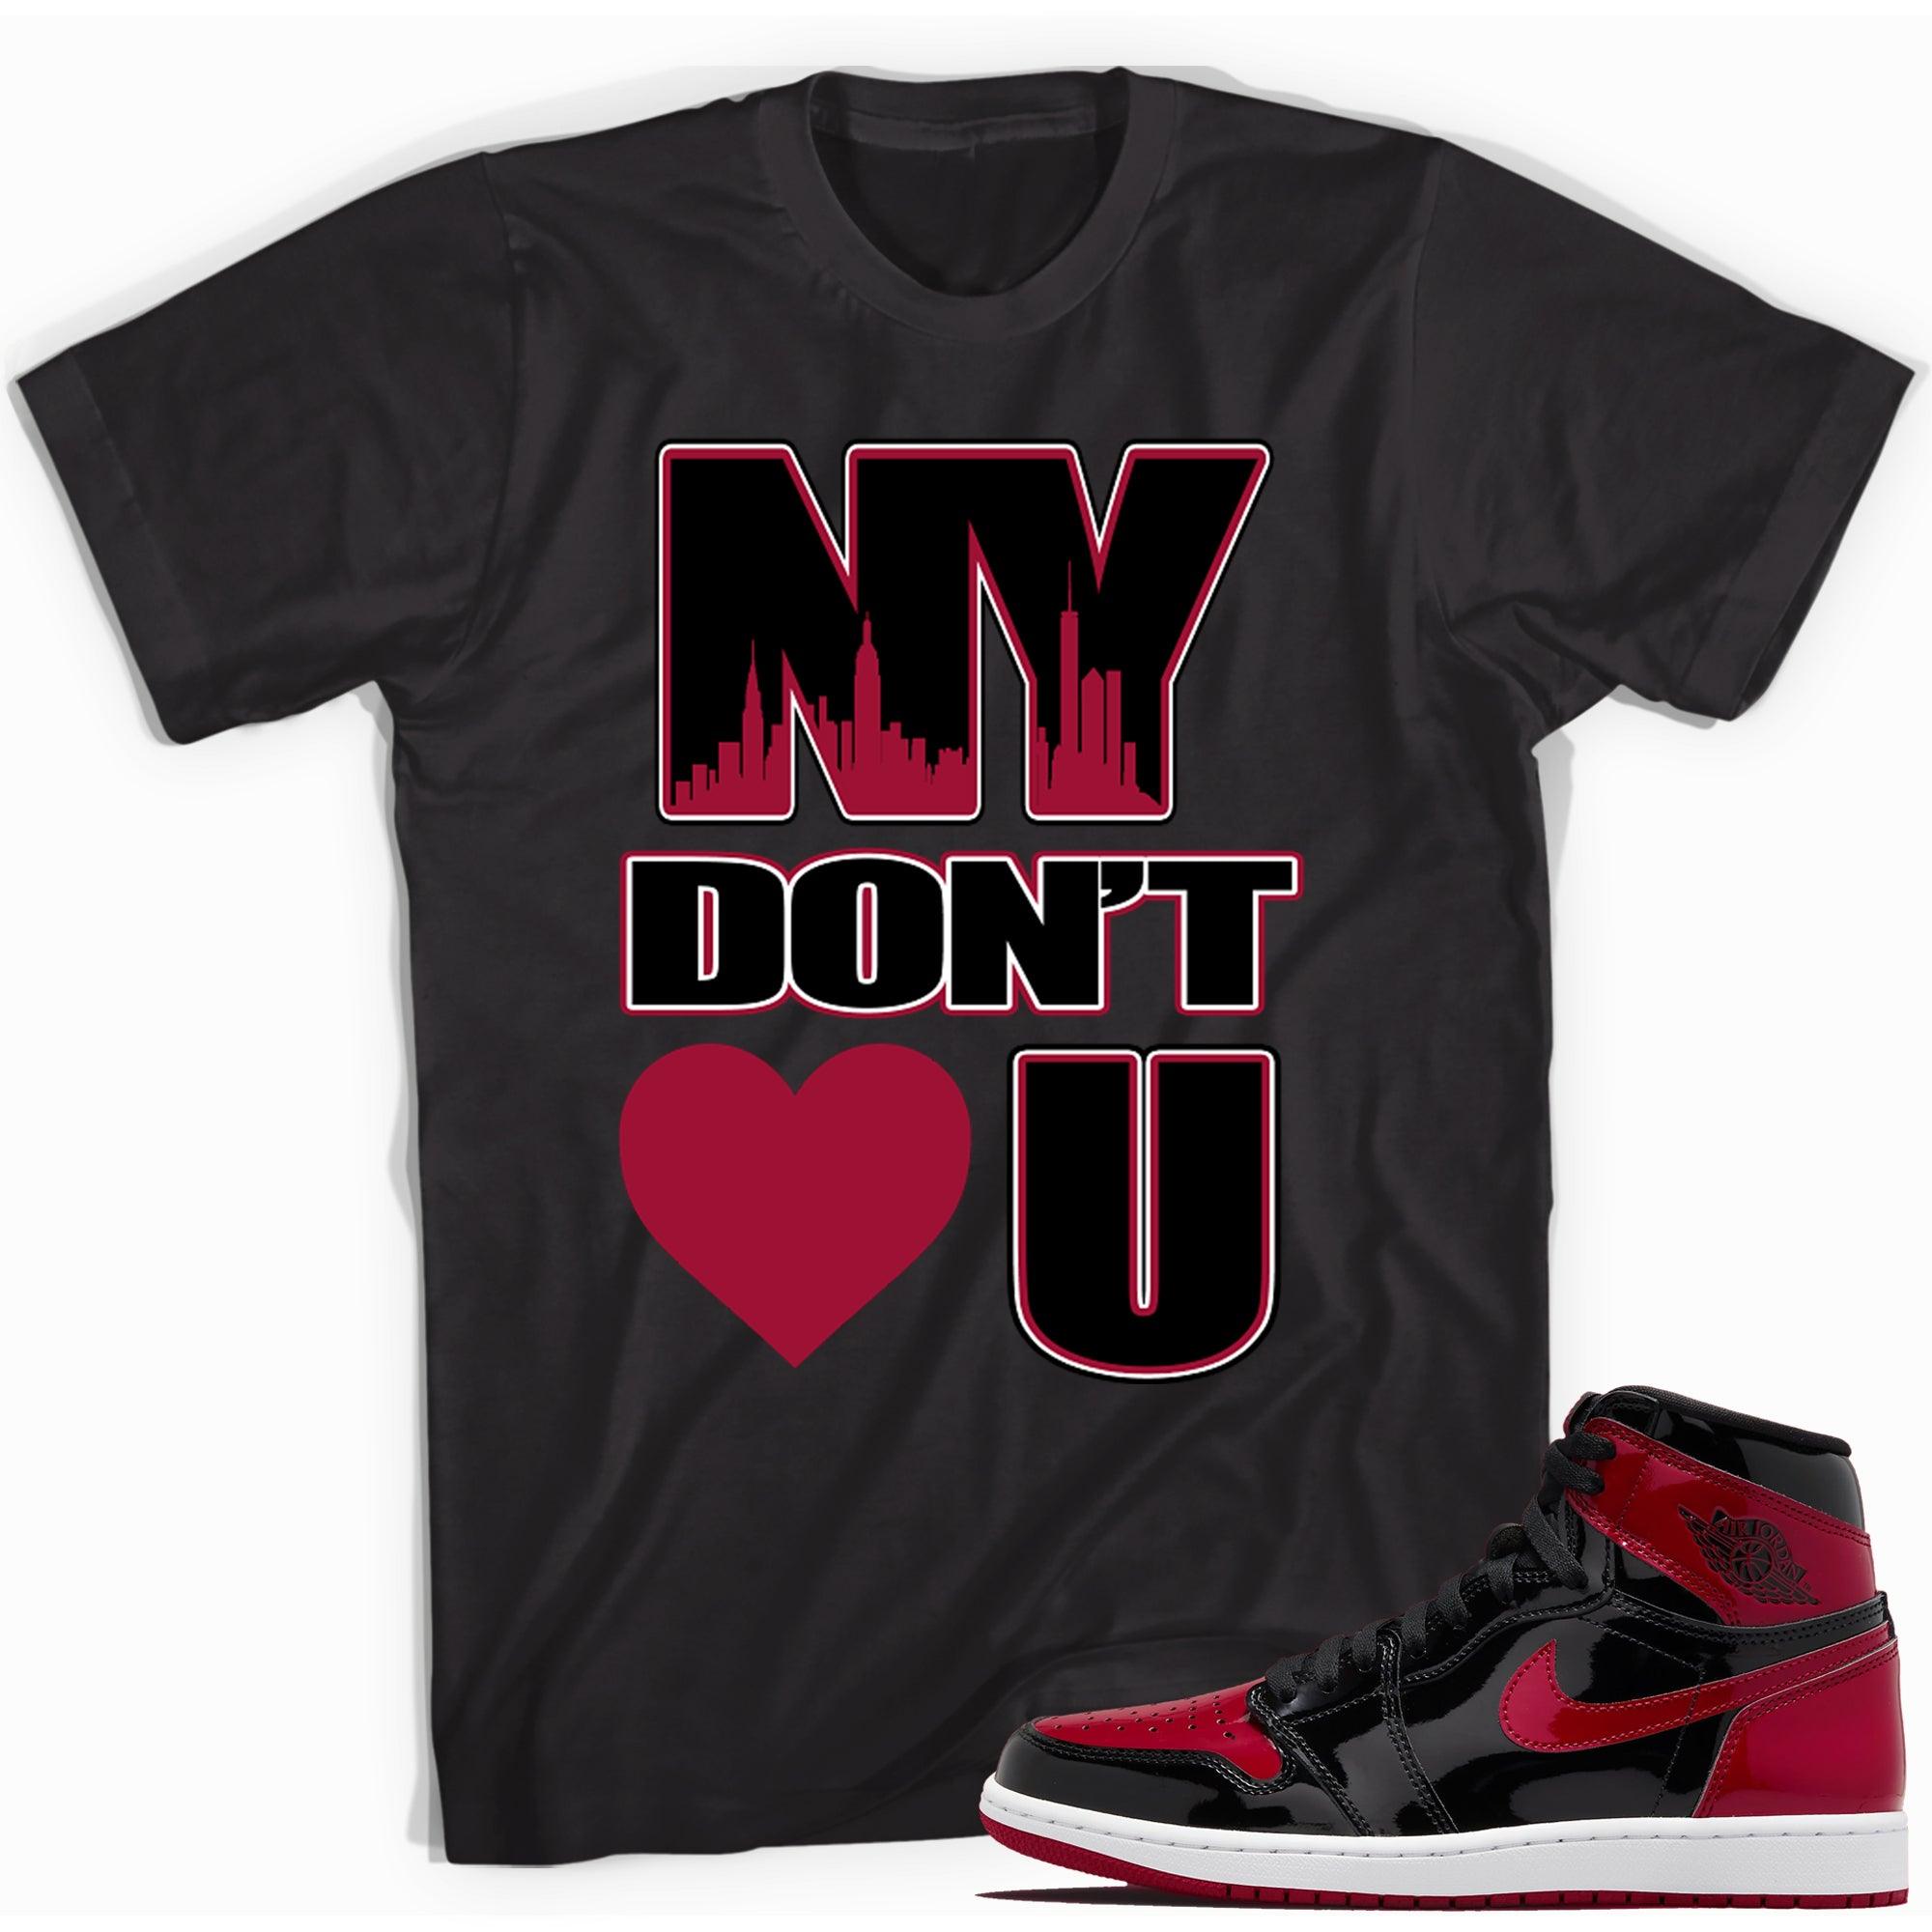 NY Don't Love You Shirt Jordan 1 Patent Leather Bred Sneakers photo